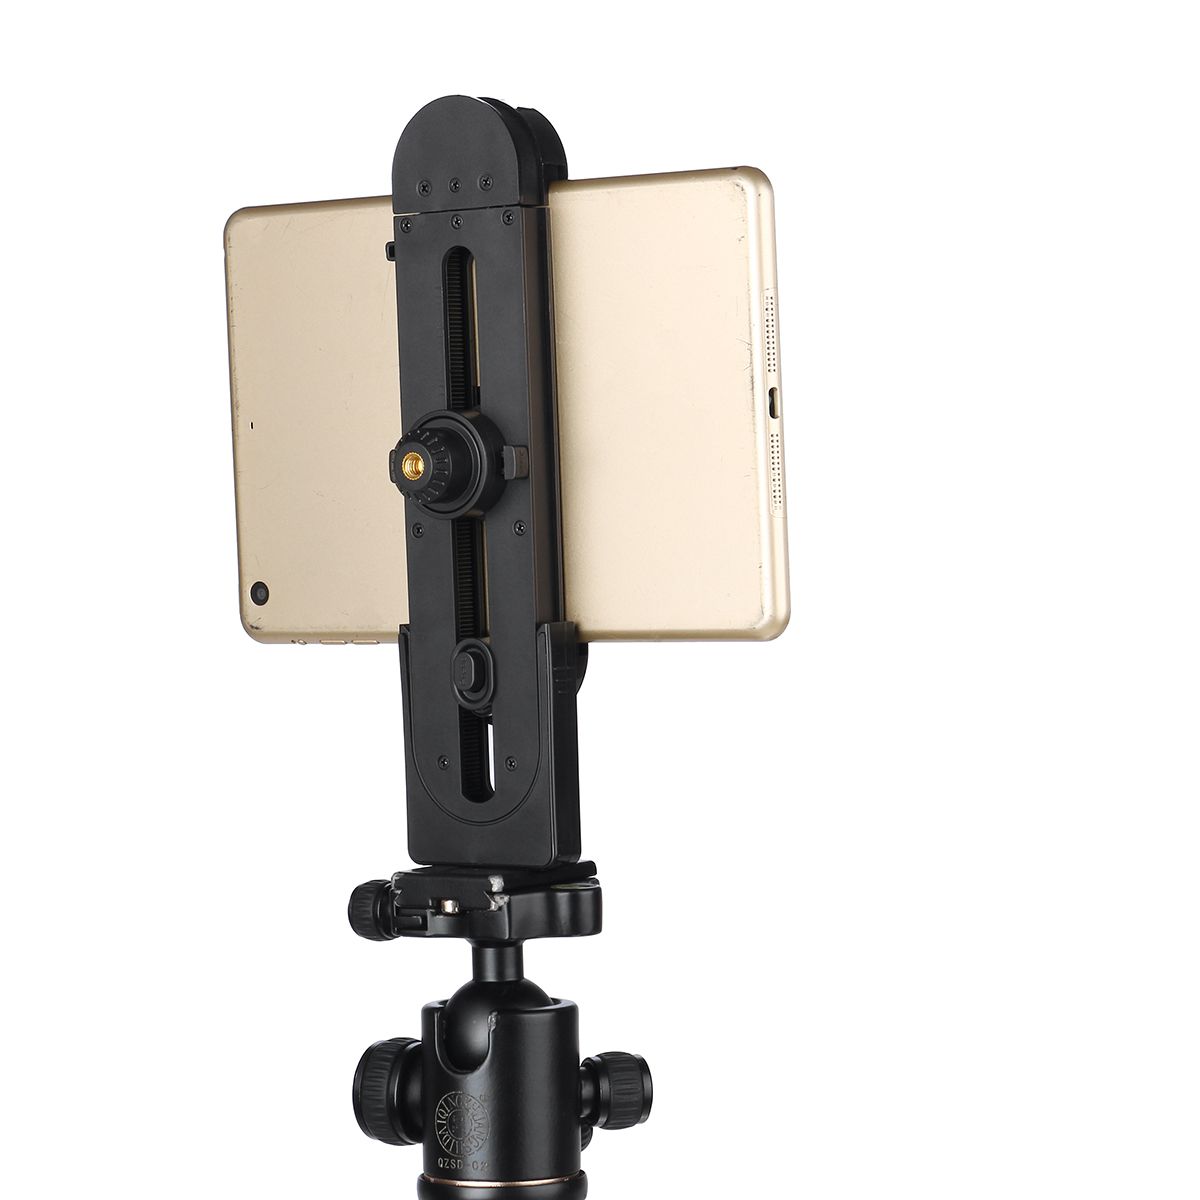 Ulanzi-Adjustable-Clamp-for-Cell-Phone-Tablet-for-iPad-Air-Pro-Mini-3-14-inch-Tablet-Phone-Tripod-Cl-1707242